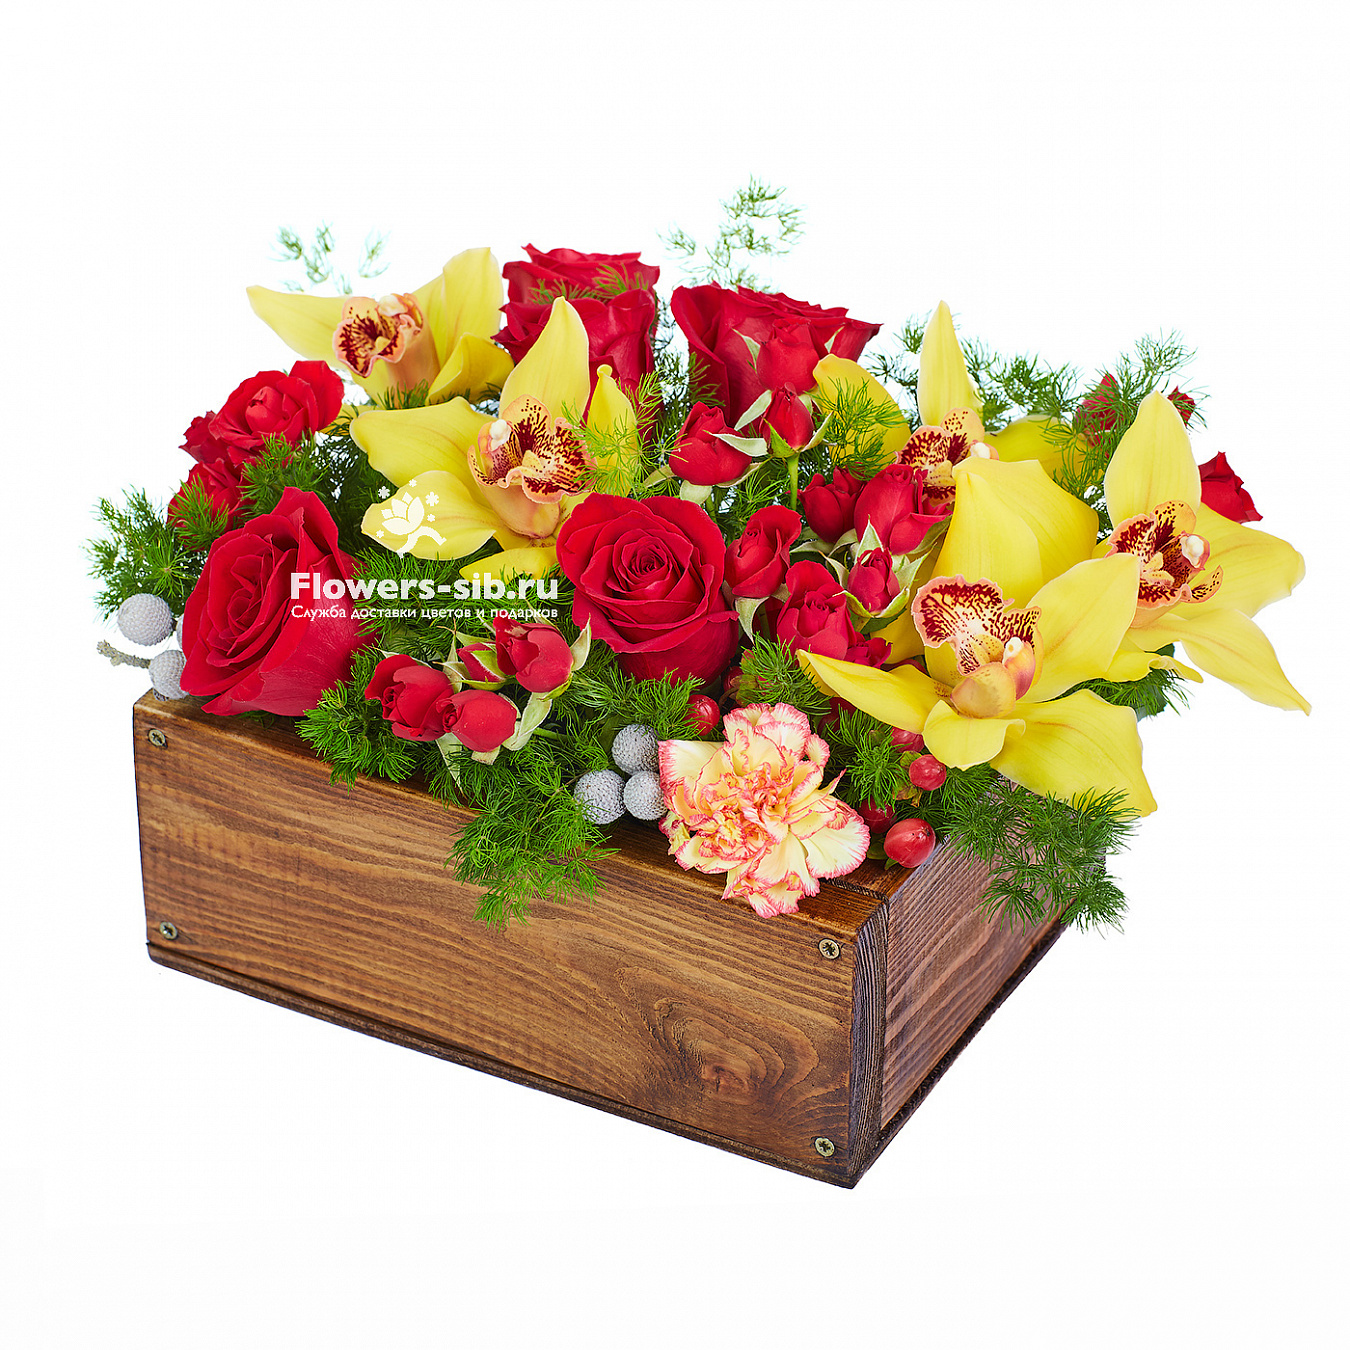 Flowers in a crate 